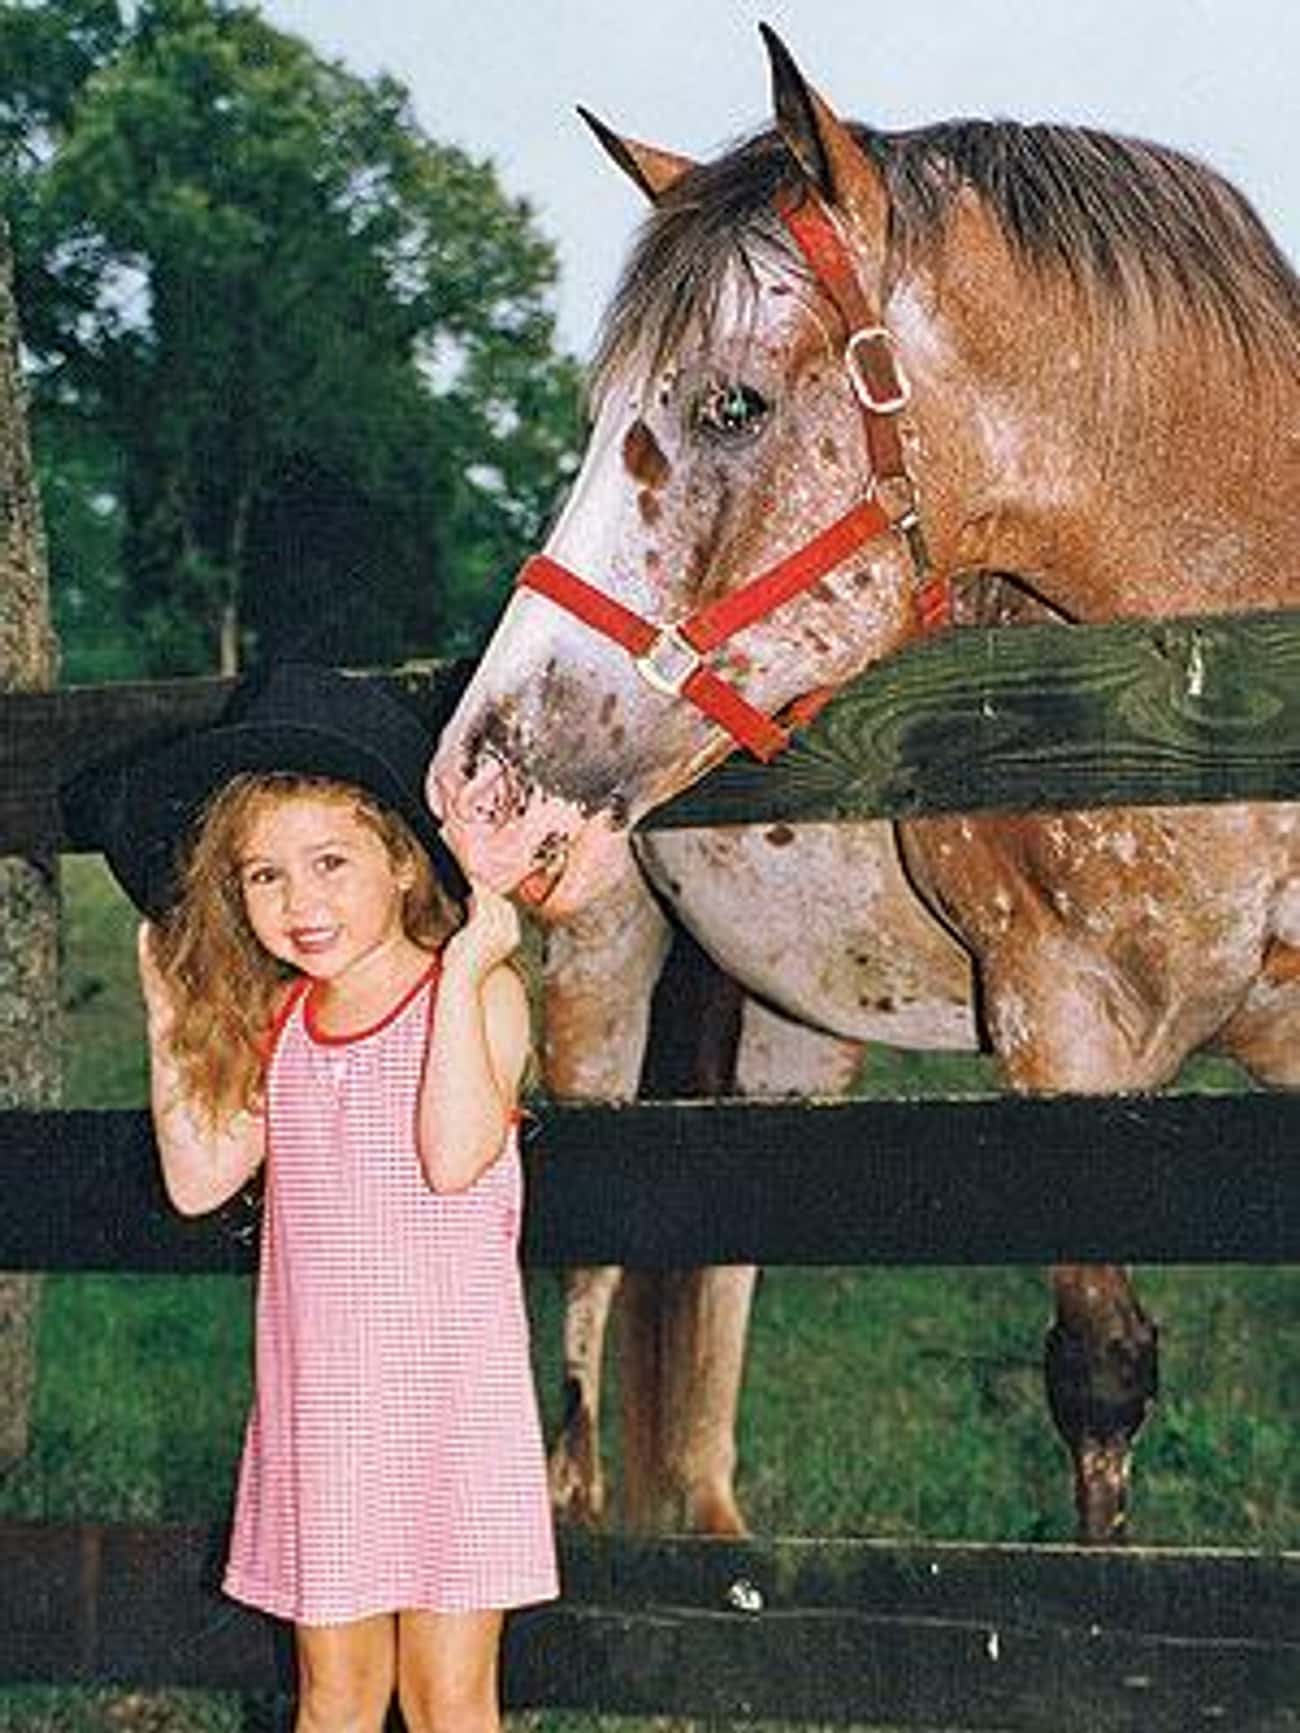 Young Miley Cyrus with a Horse